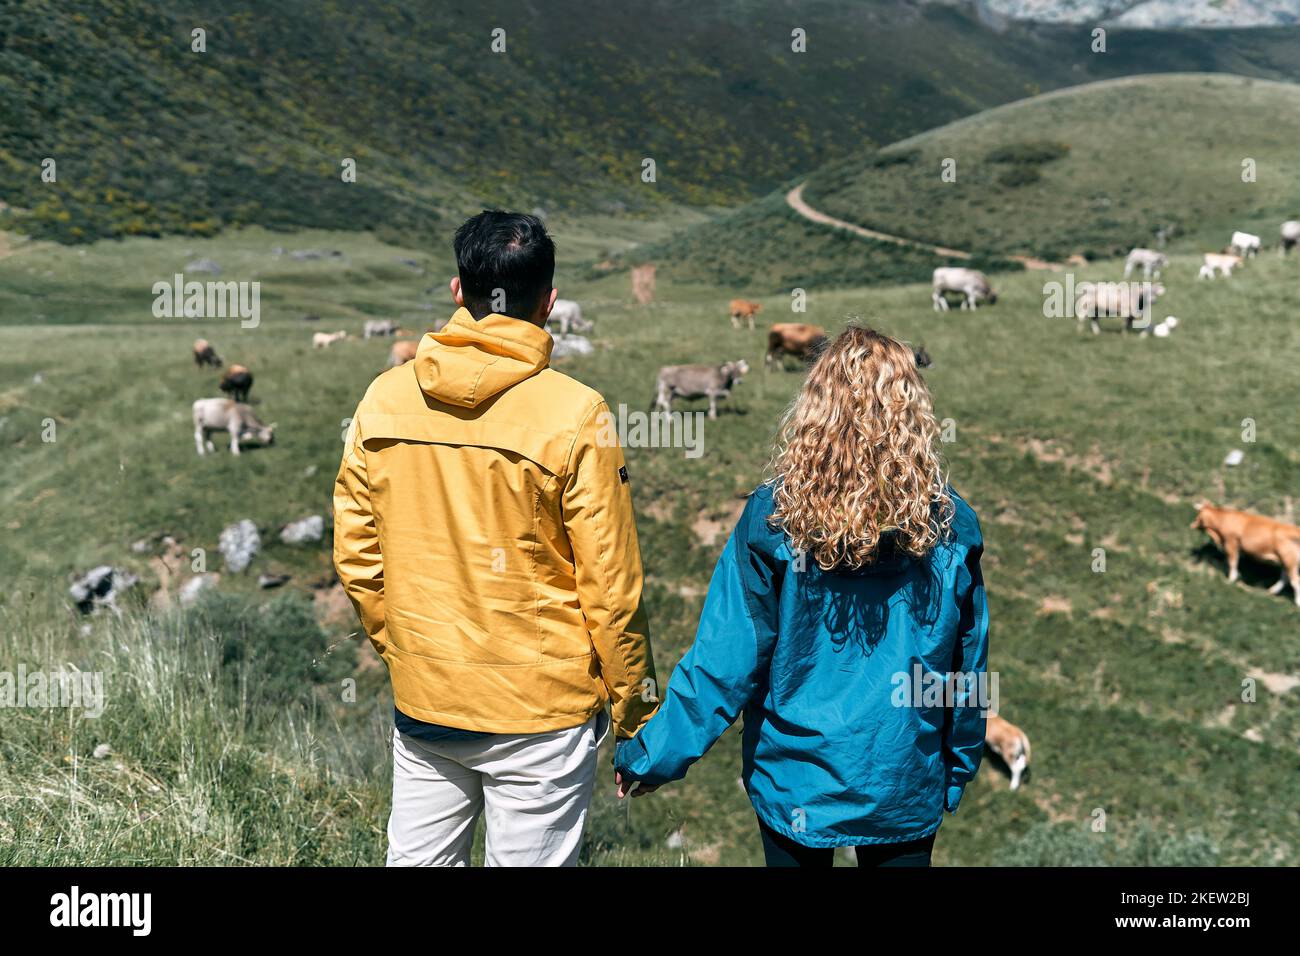 dark-haired boy with yellow jacket and blonde girl with blue jacket with calm backs standing contemplating the cows in the valley, ruta del cares Stock Photo